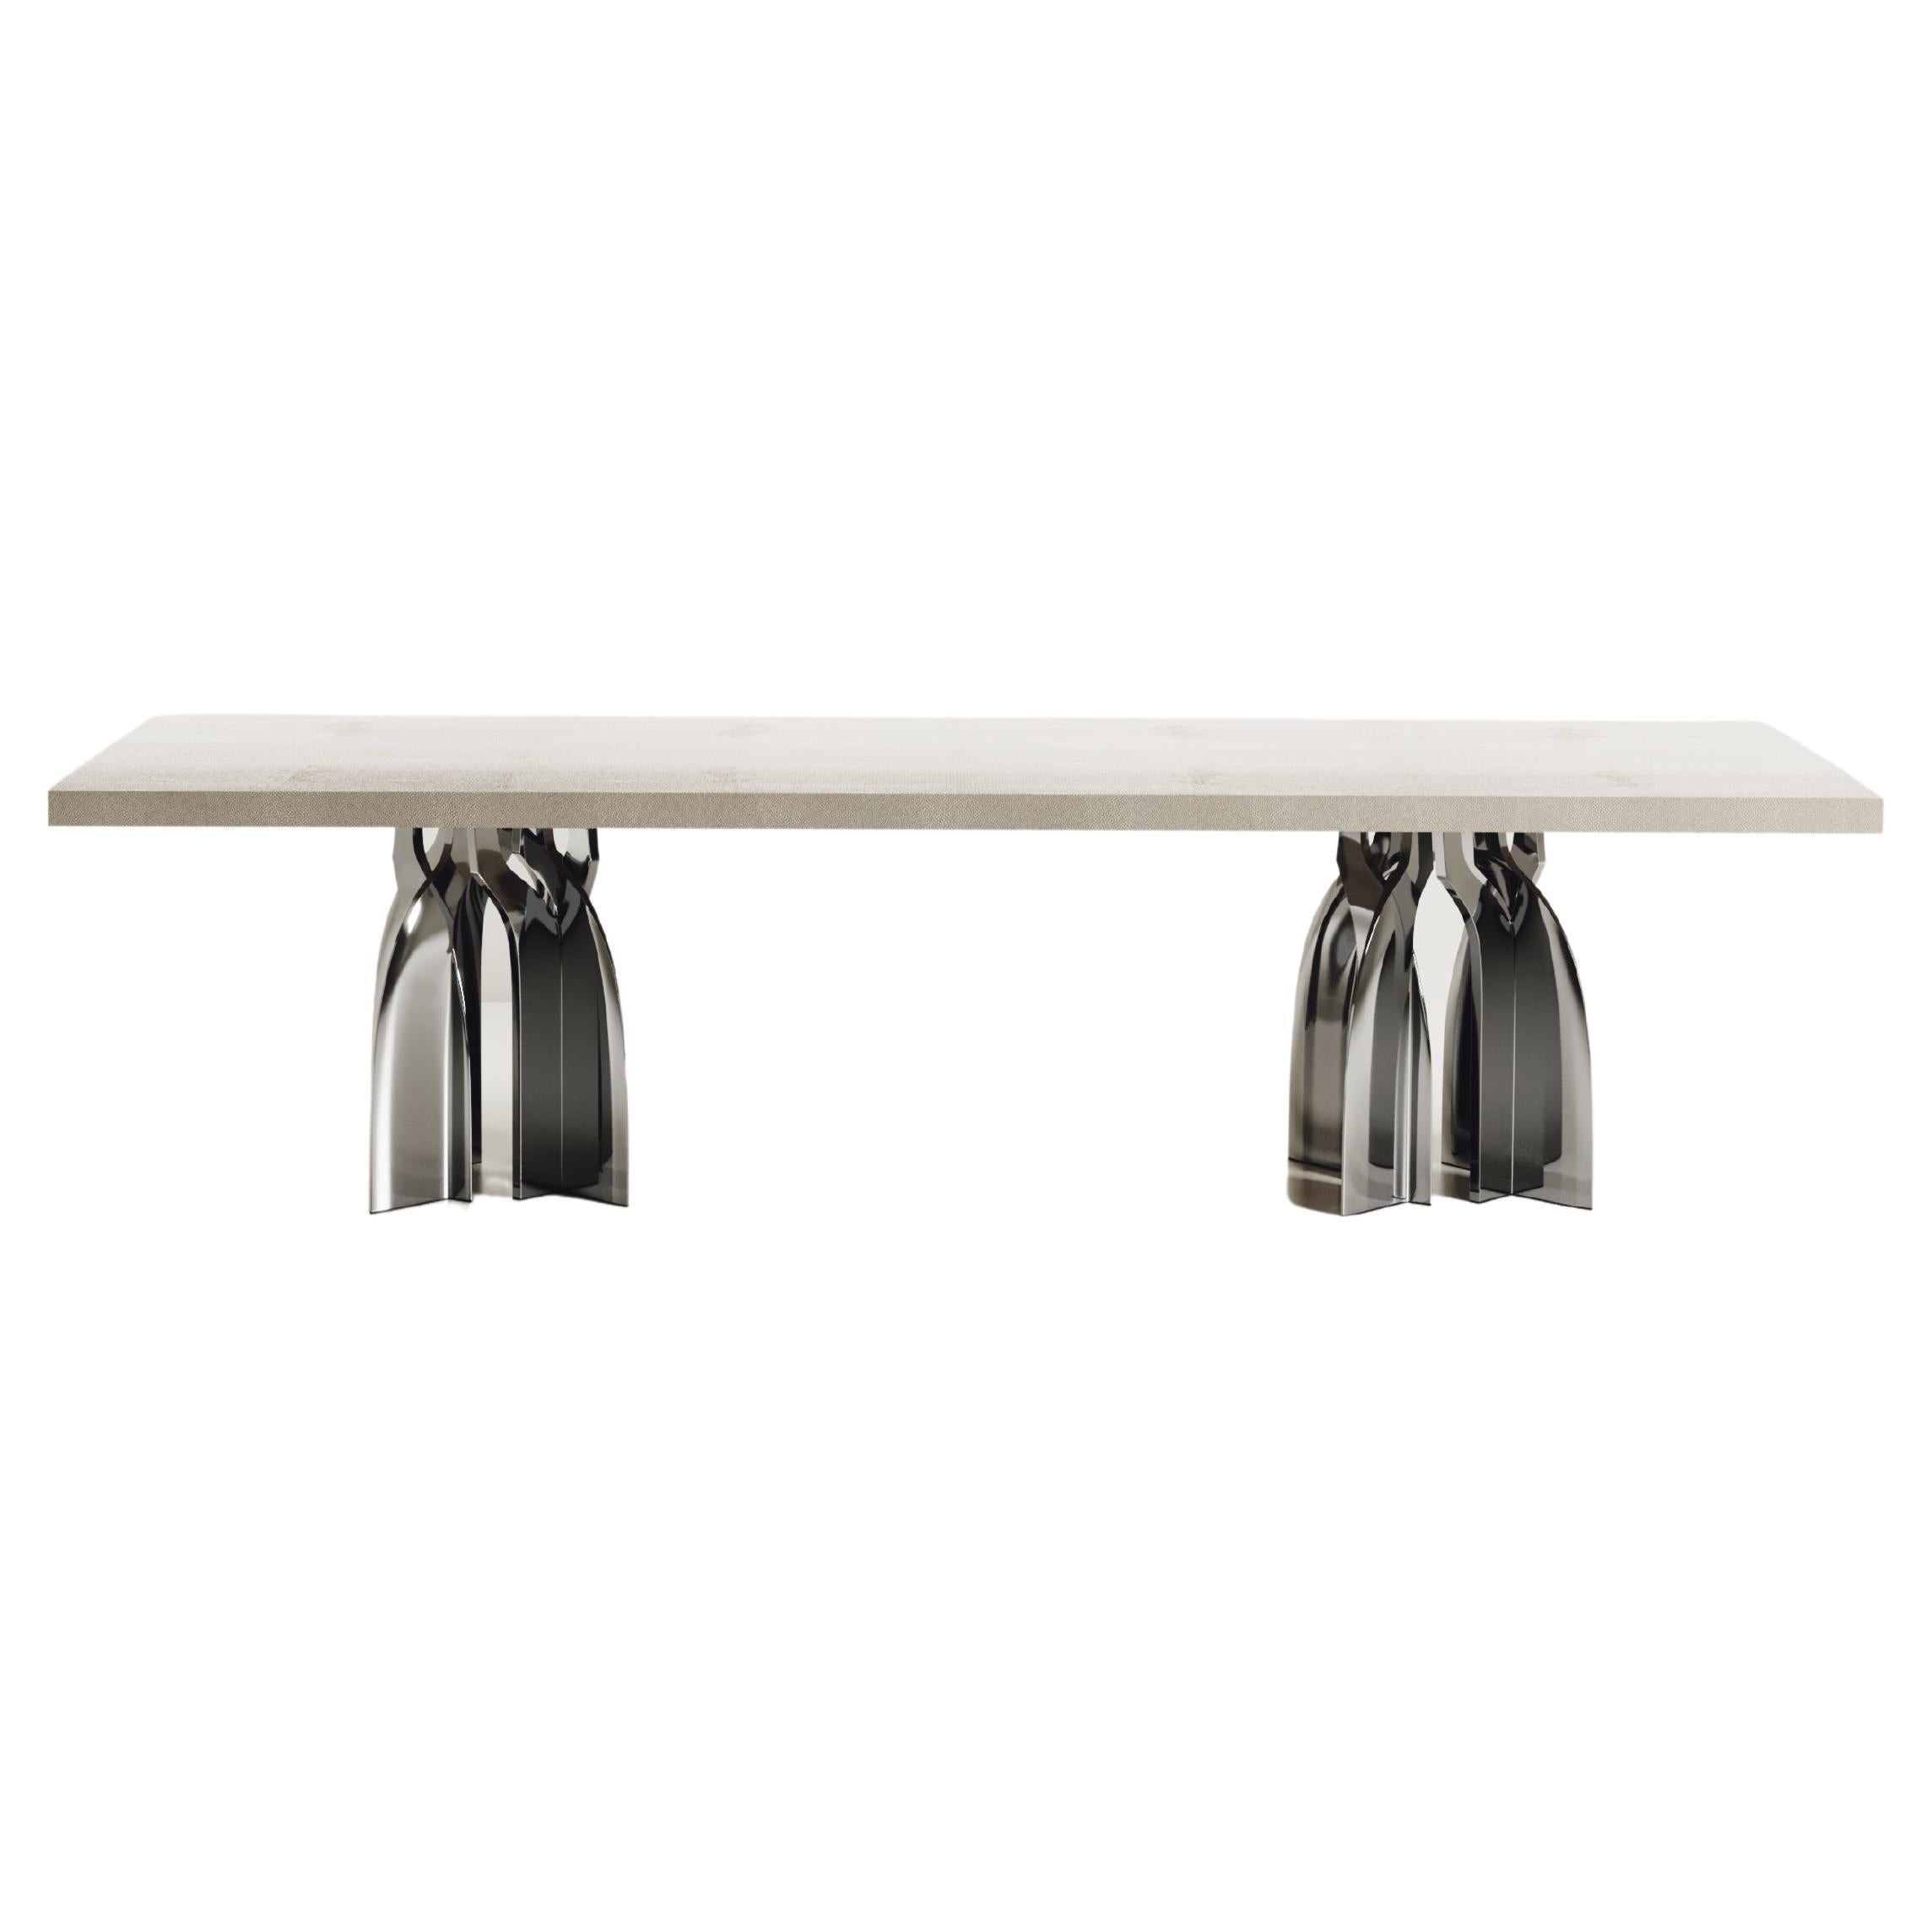 Sculptural Dining Table in Shagreen & Stainless Steel by Kifu Paris